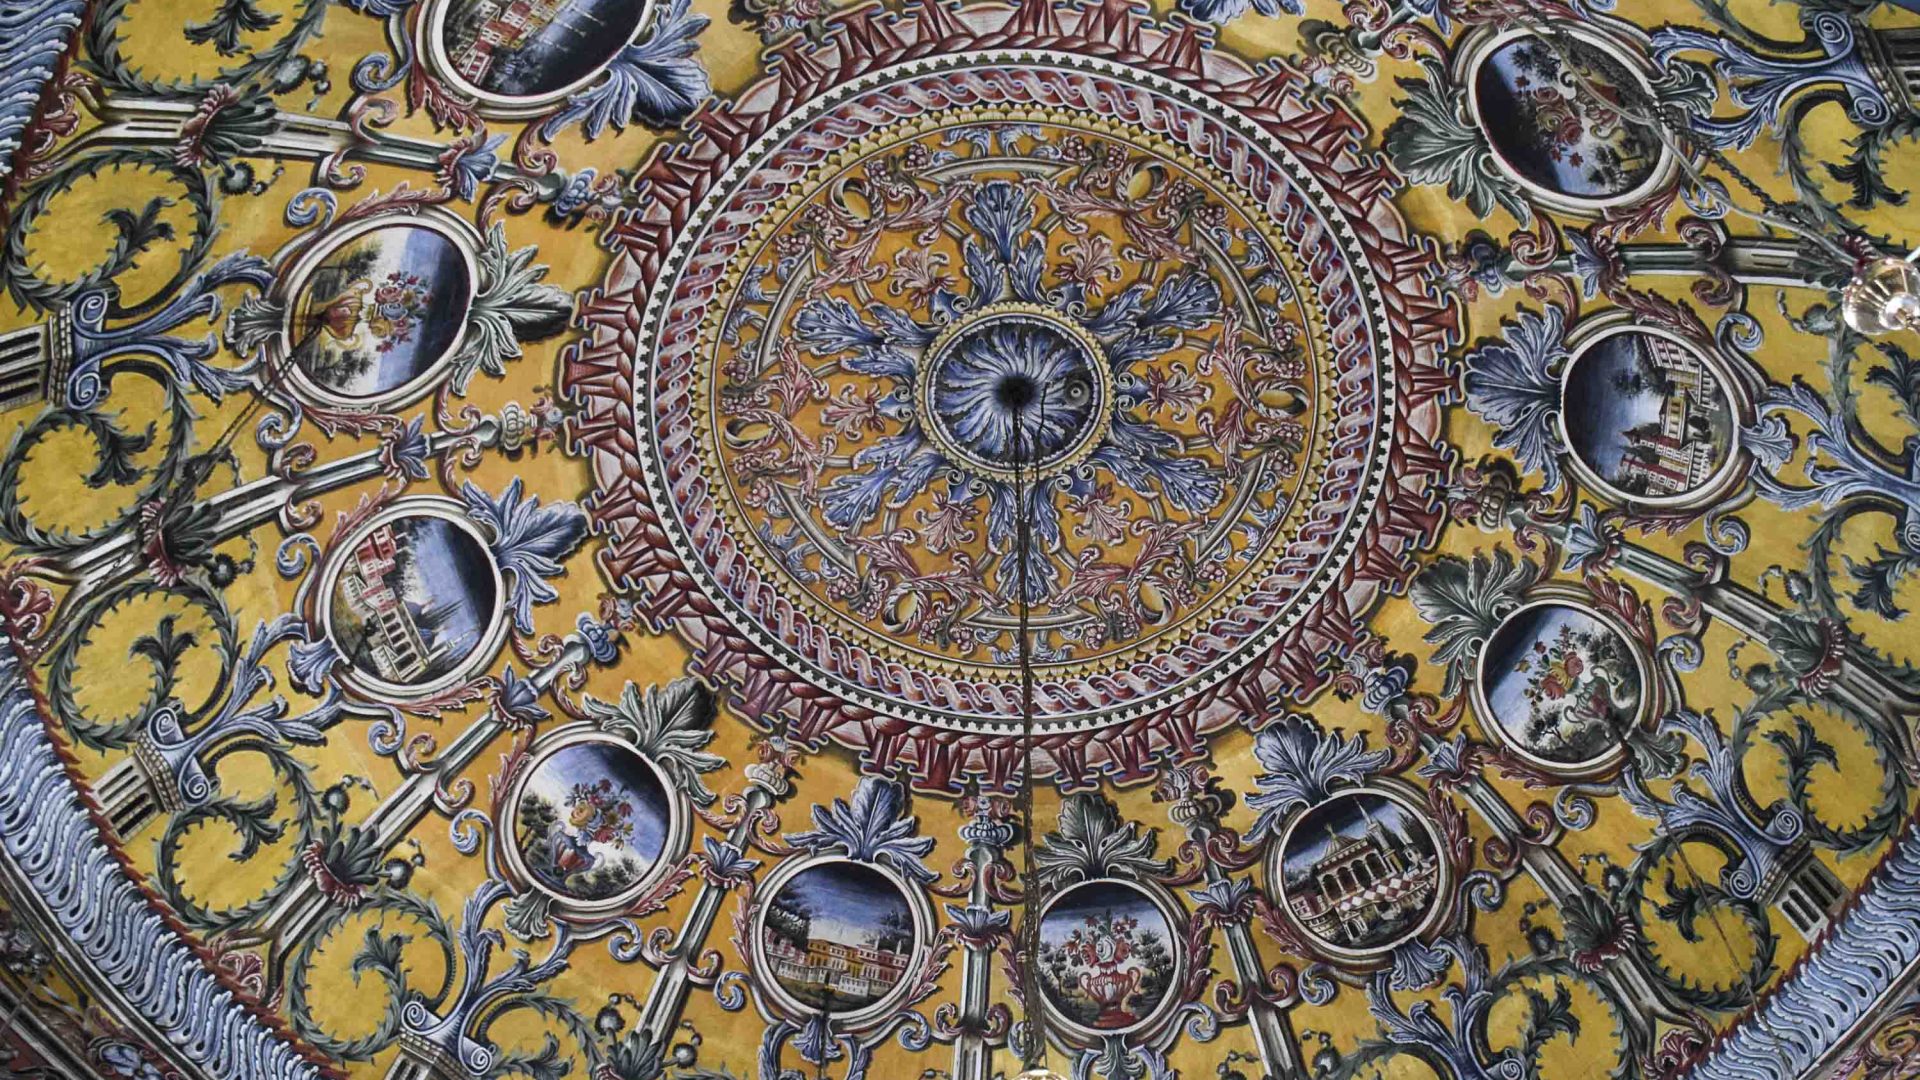 The European-Muslim art style inside the Ali Pasha Mosque. Circular in shape with a range of patterns and colors.